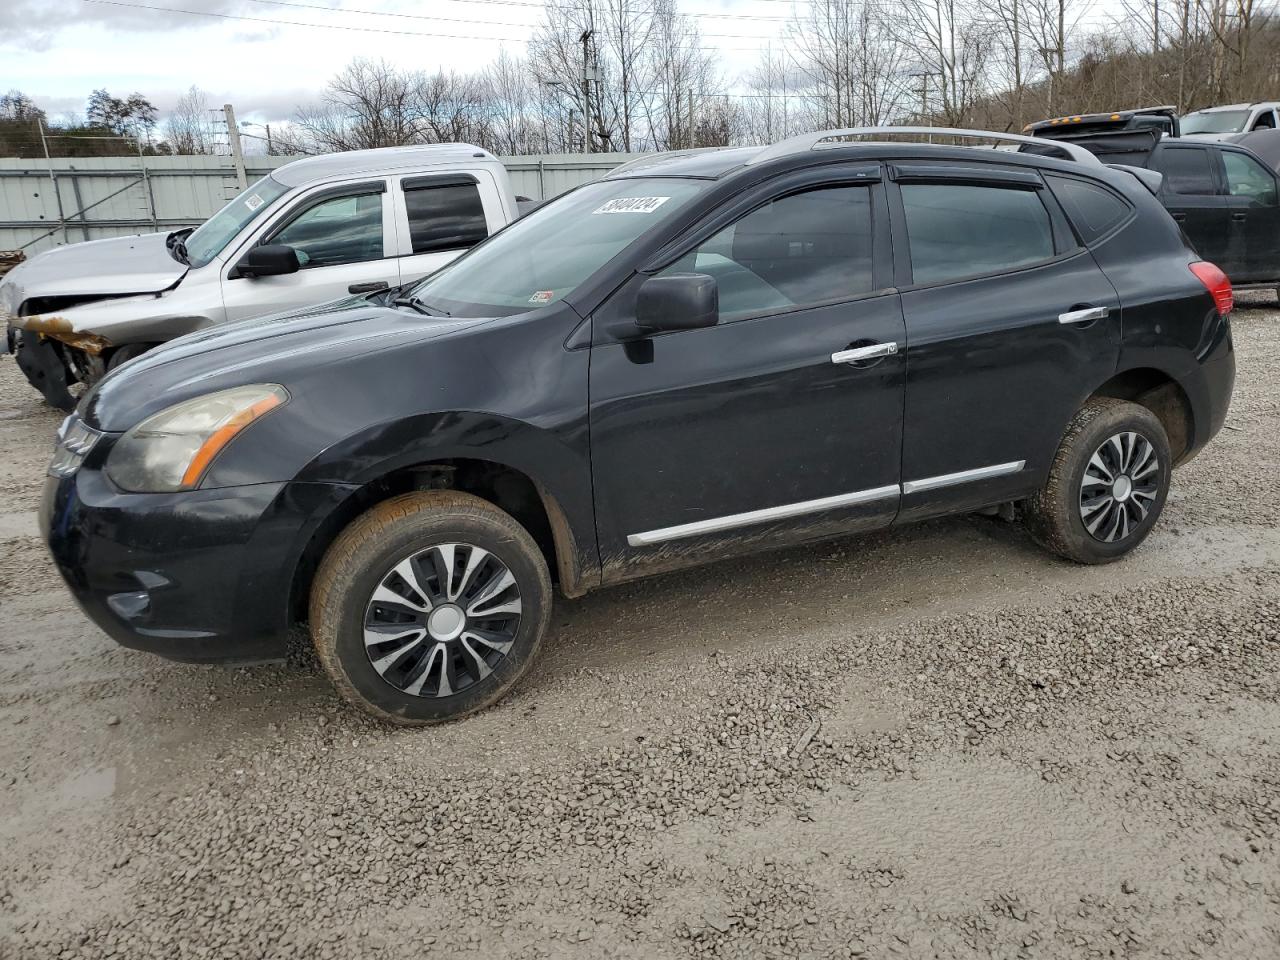 vin: JN8AS5MT4FW660083 JN8AS5MT4FW660083 2015 nissan rogue 2500 for Sale in 25526 7634, Wv - Charleston, Hurricane, USA